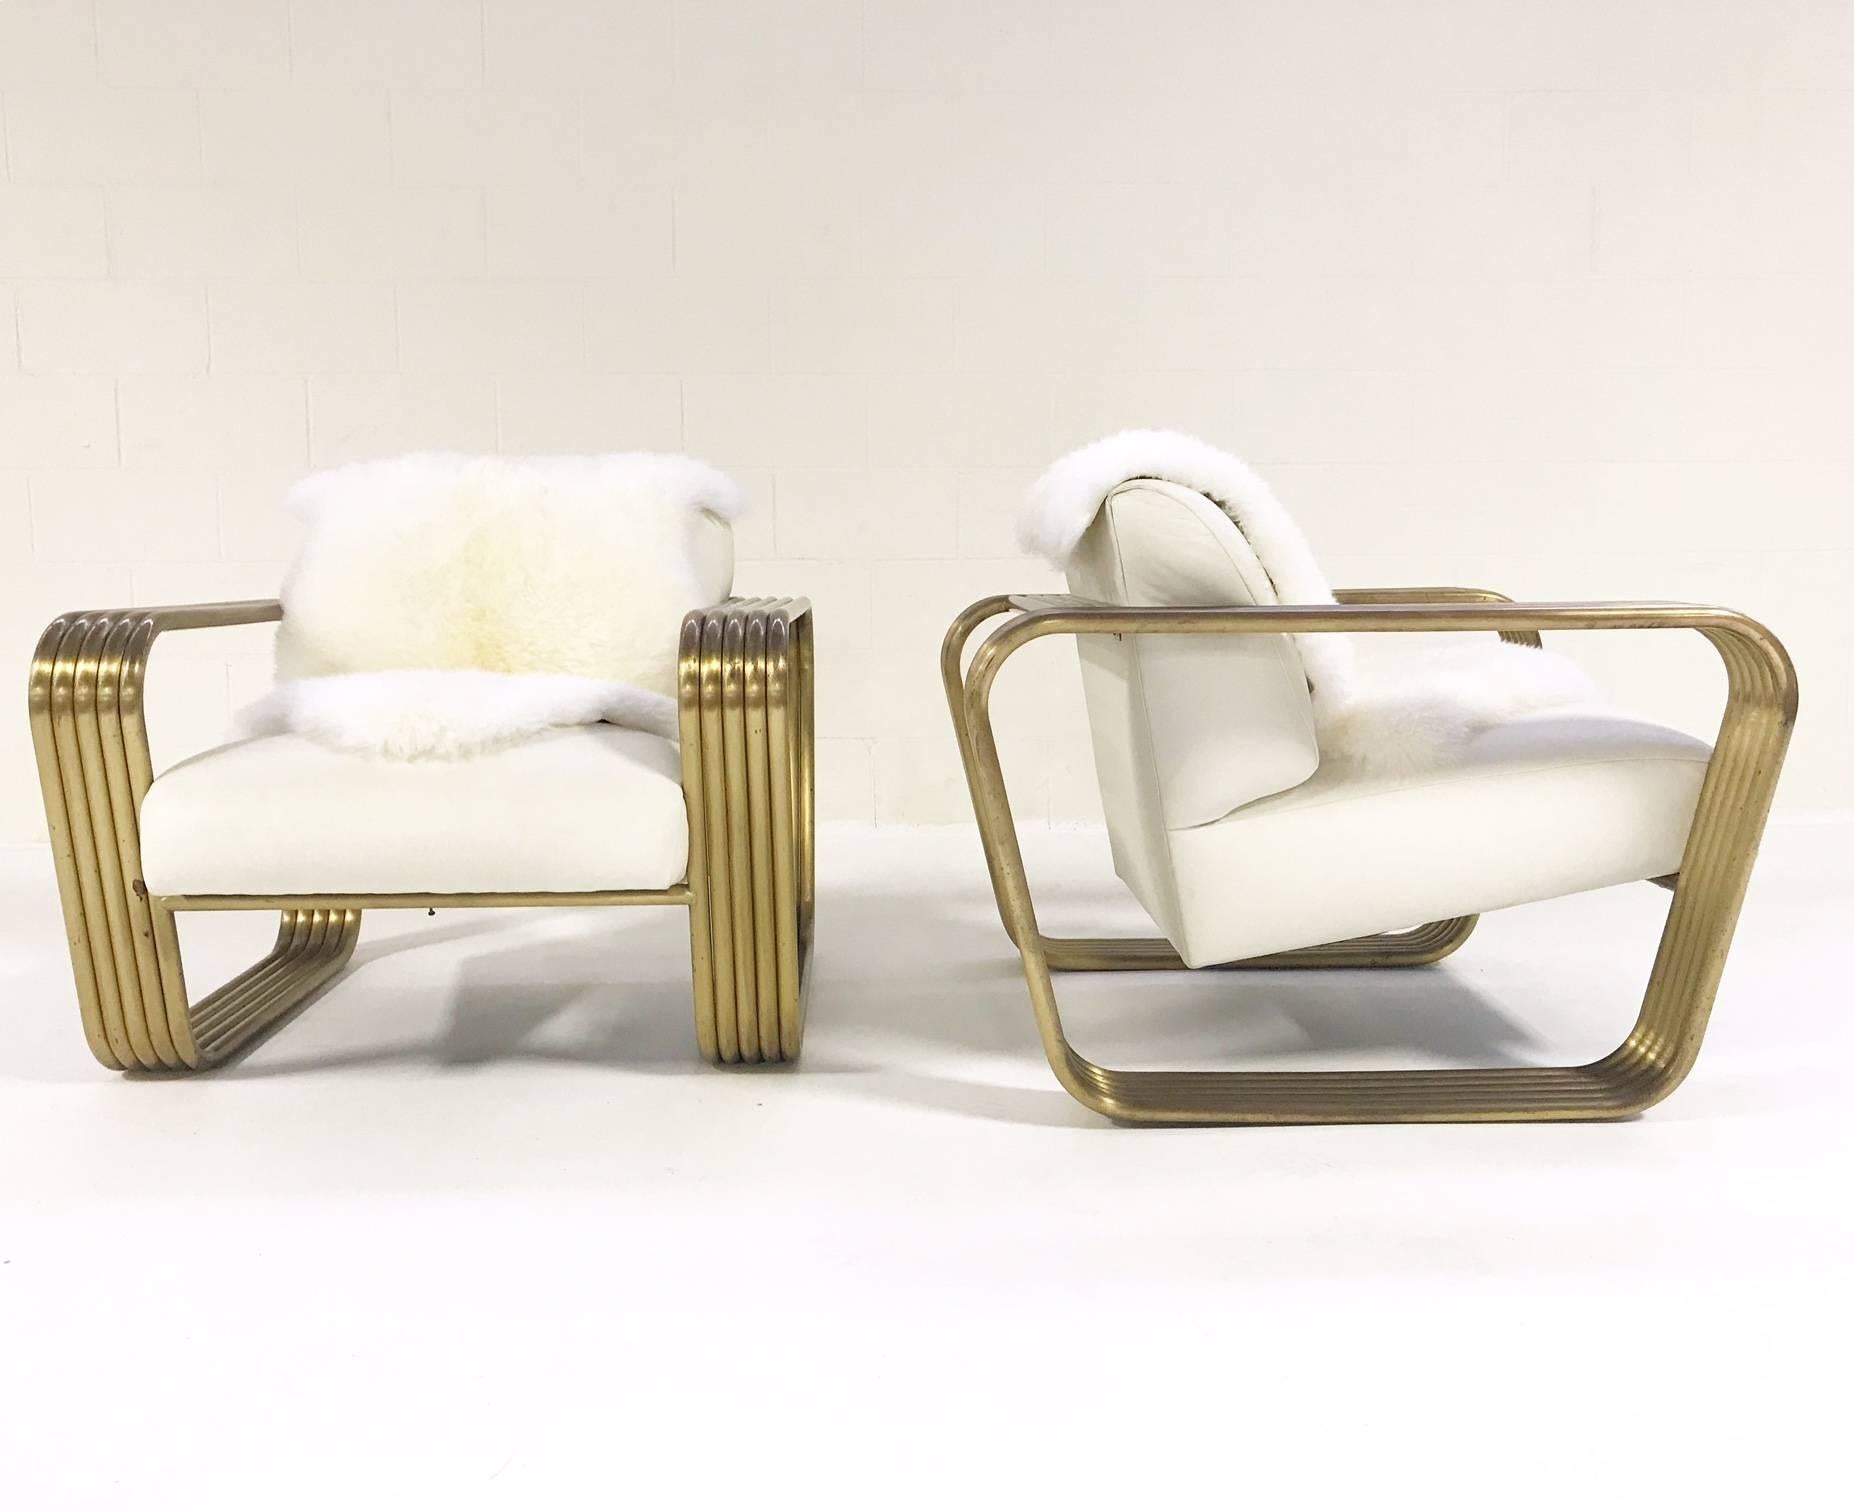 Late 20th Century Pair of circa 1975 Jay Spectre Lounge Chairs with New Zealand Sheepskin Throws